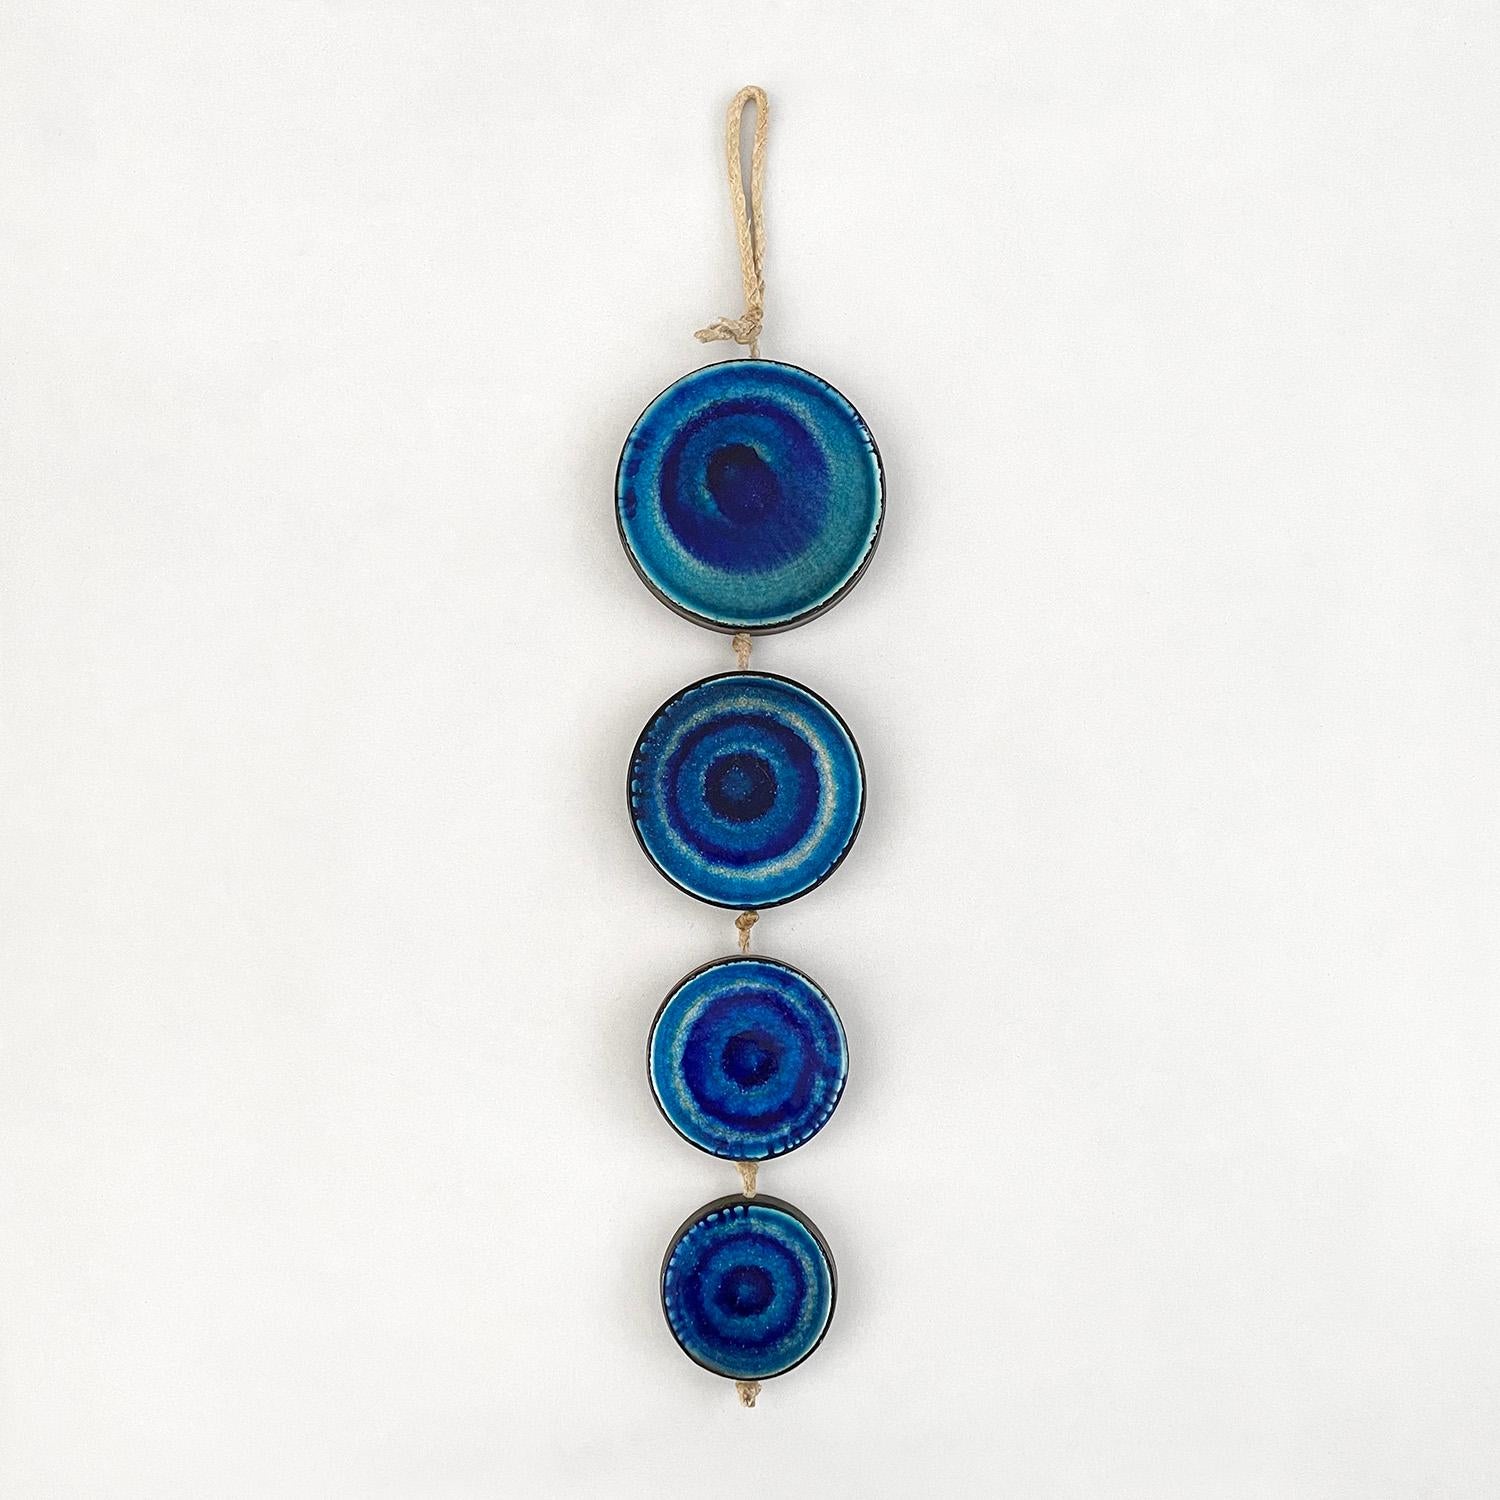 Ceramic disc wall sculpture
Germany, circa 1960’s
Beautiful statement piece
Four unique ceramic discs with concentric rings
Rich color palette ranging from deep blues to light turquoise
Original rope cording with light surface markings
Patina from